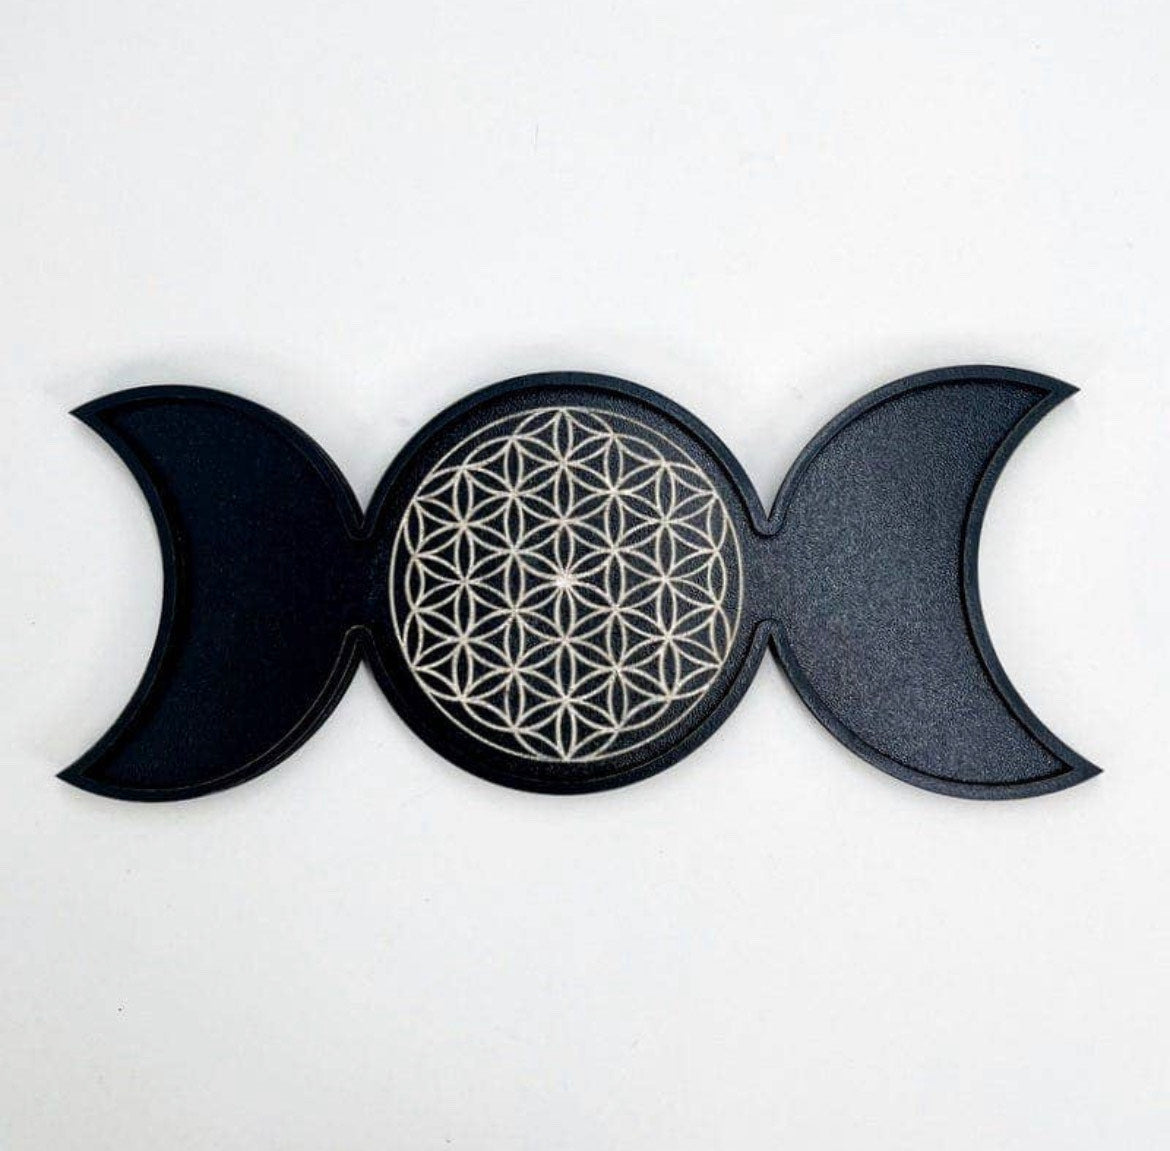 Triple Moon Tray - Engraved Flower of Life - Altar/Jewelry tray